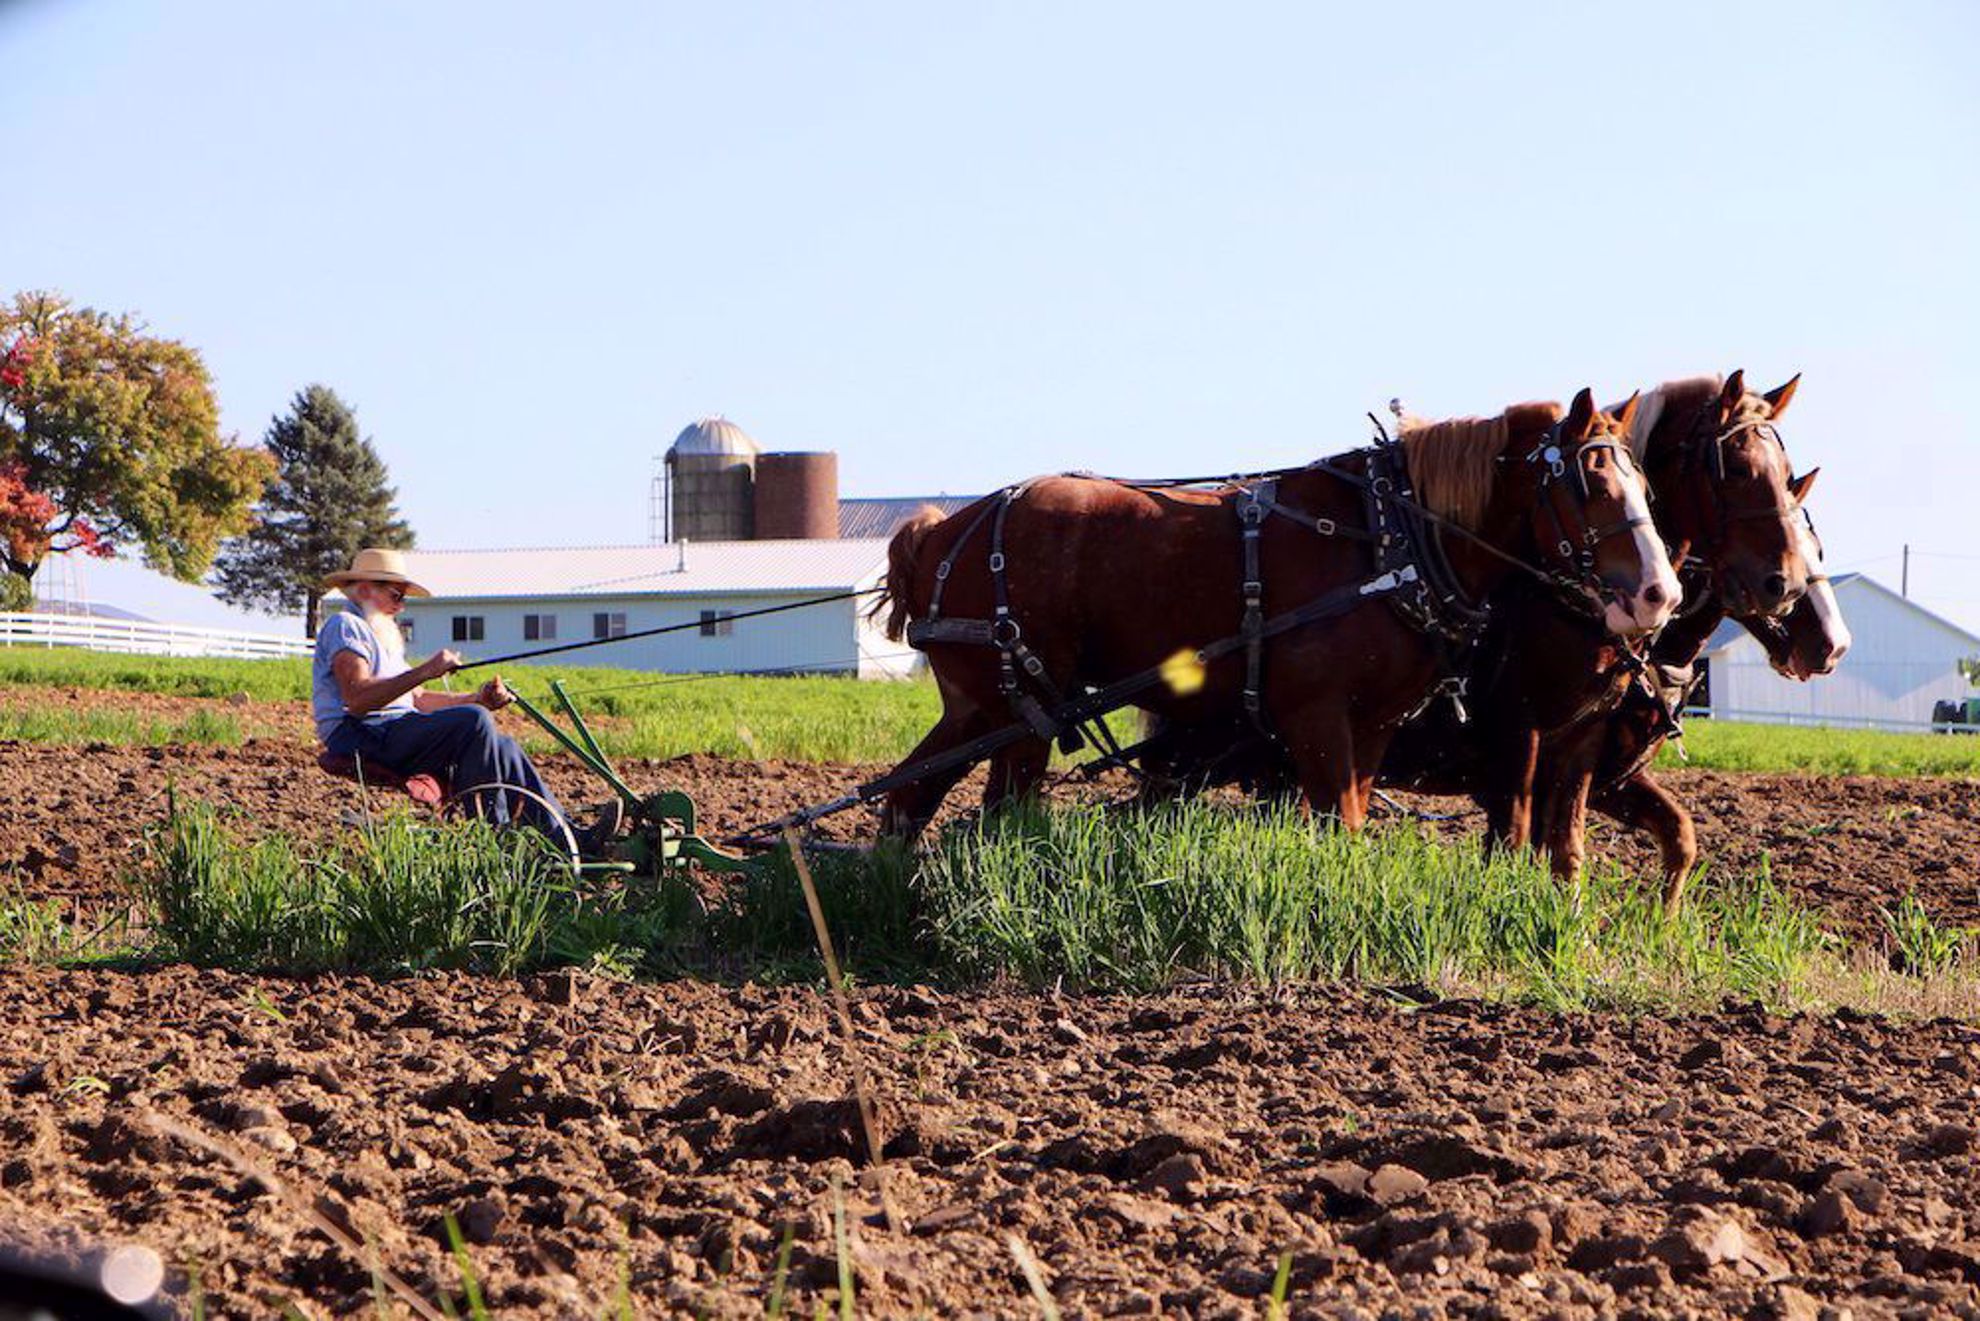 Amish man with plow horses